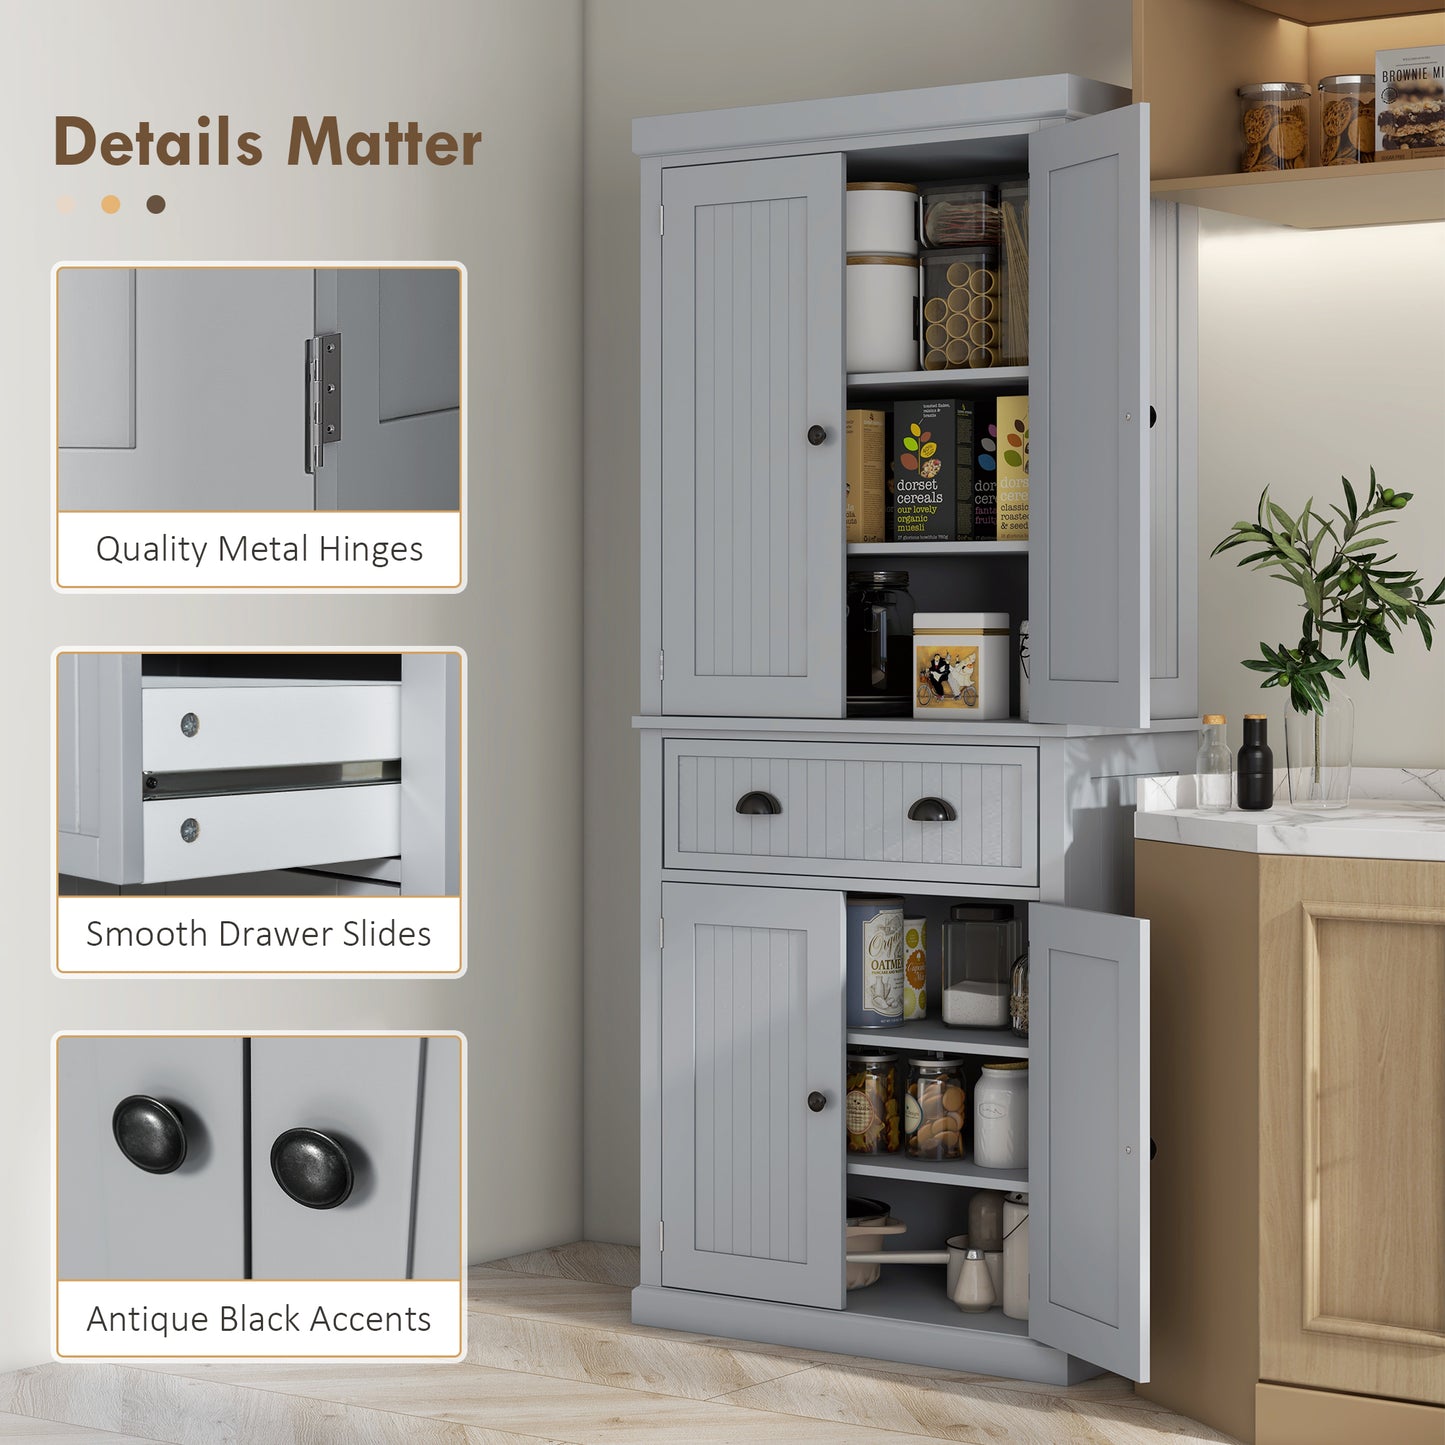 HOMCOM Traditional Kitchen Cupboard Freestanding Storage Cabinet with Drawer Doors and Adjustable Shelves Grey